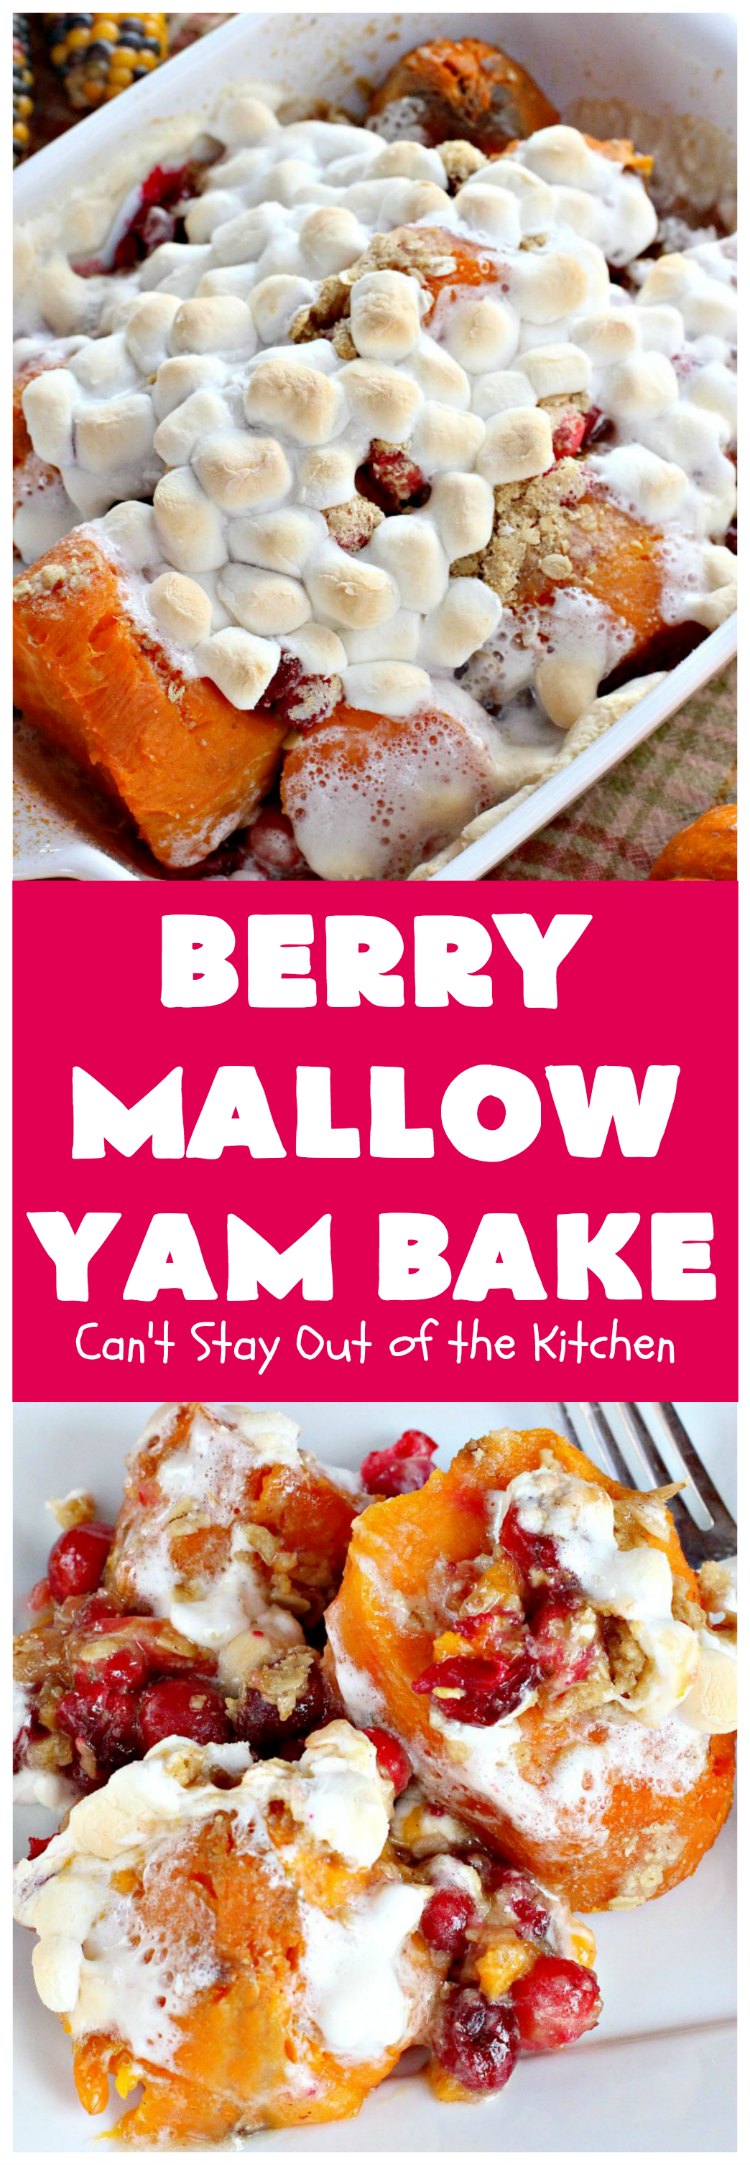 Berry Mallow Yam Bake | Can't Stay Out of the Kitchen